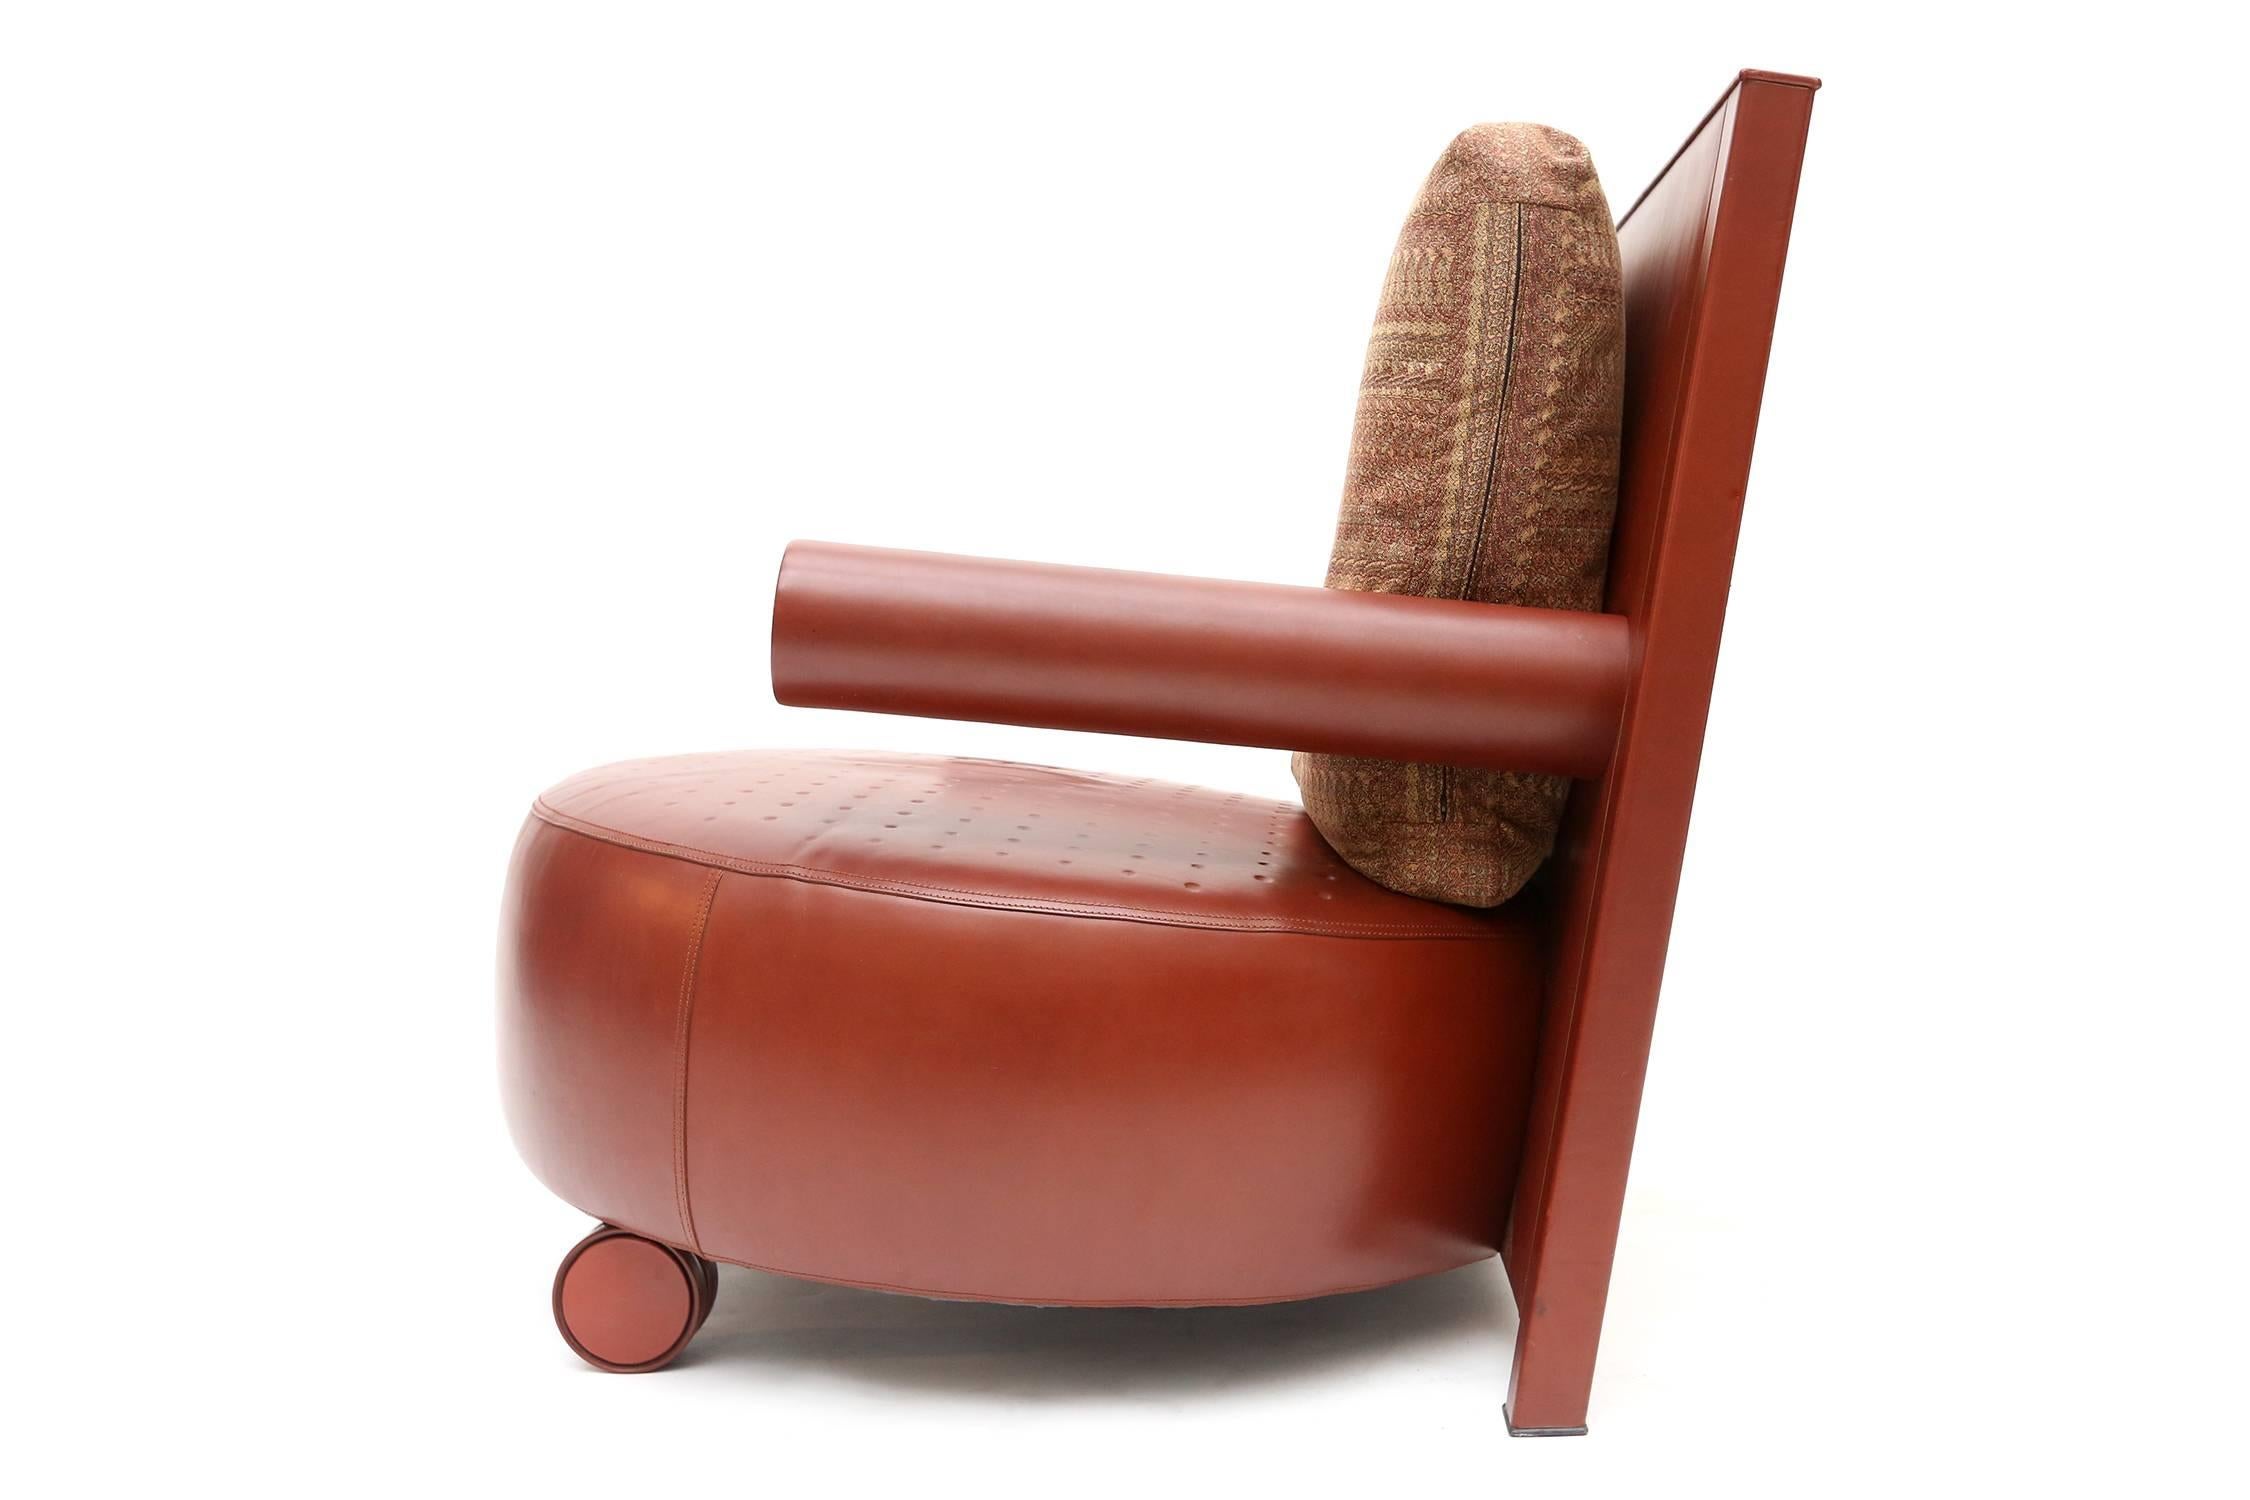 Antonio citterio armchair for B&B Italia red brown leather and silk. Very comfortable back cushion is filled with plumes. This beautiful seat is rarely offered and out of production at B&B Italia. Measures: D 95 cm, H 81cm, W 84 cm.